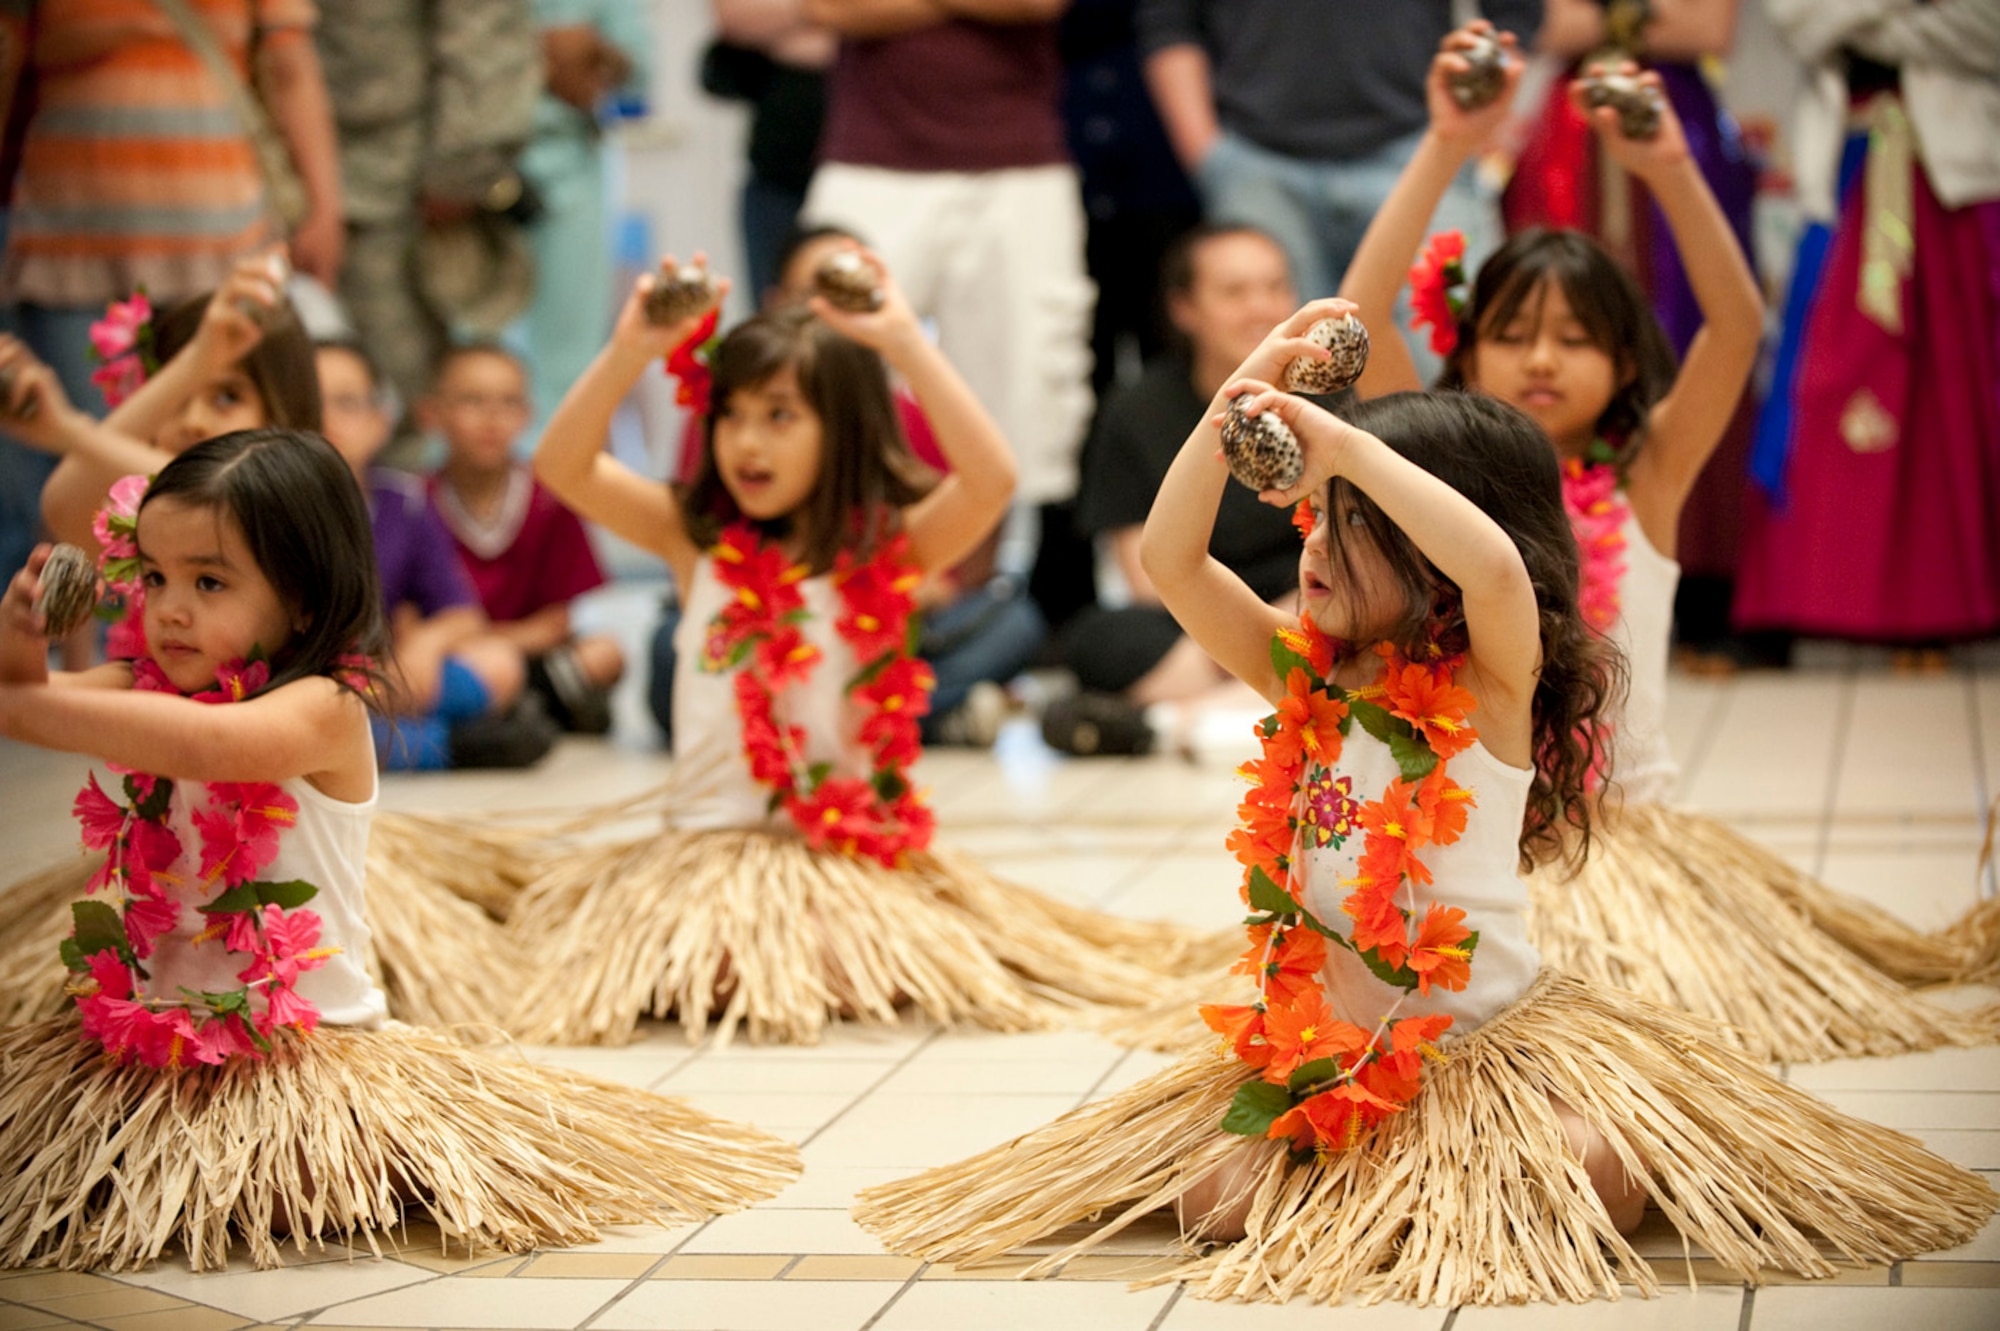 MISAWA AIR BASE, Japan -- Children perform a hula dance with sea shells at the Misawa Base Exchange May 16, 2009. A team like this allows children of Asian-Pacific descent to practice and share their cultural heritage here at Misawa Air Base. (U.S. Air Force photo by Staff Sgt. Samuel Morse)